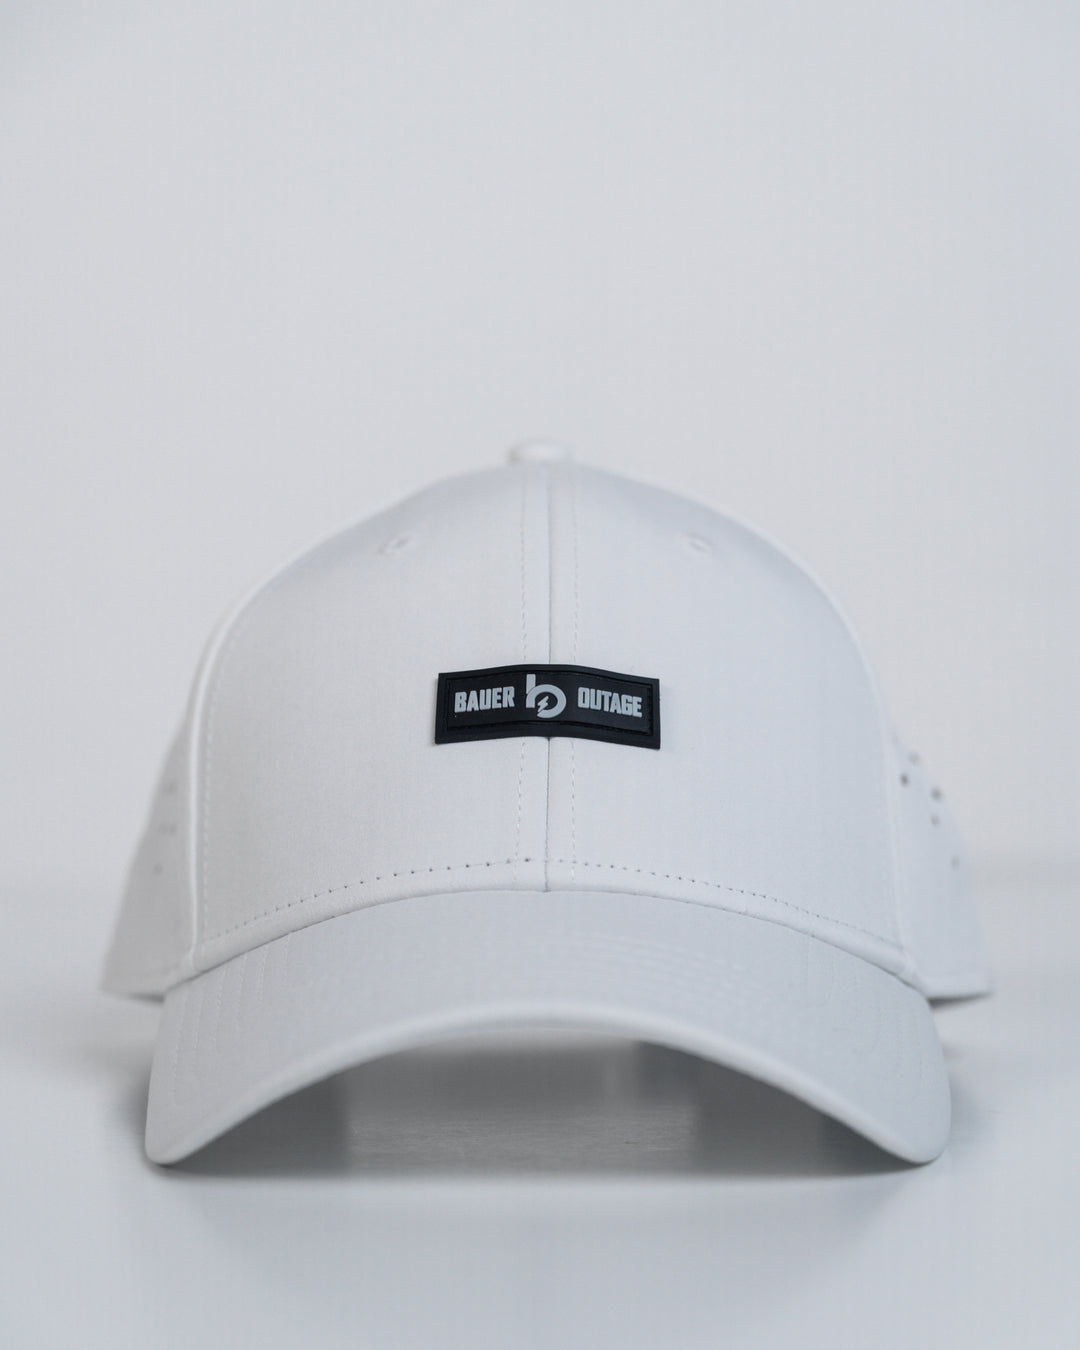 bauer outage white performance hat front portrait